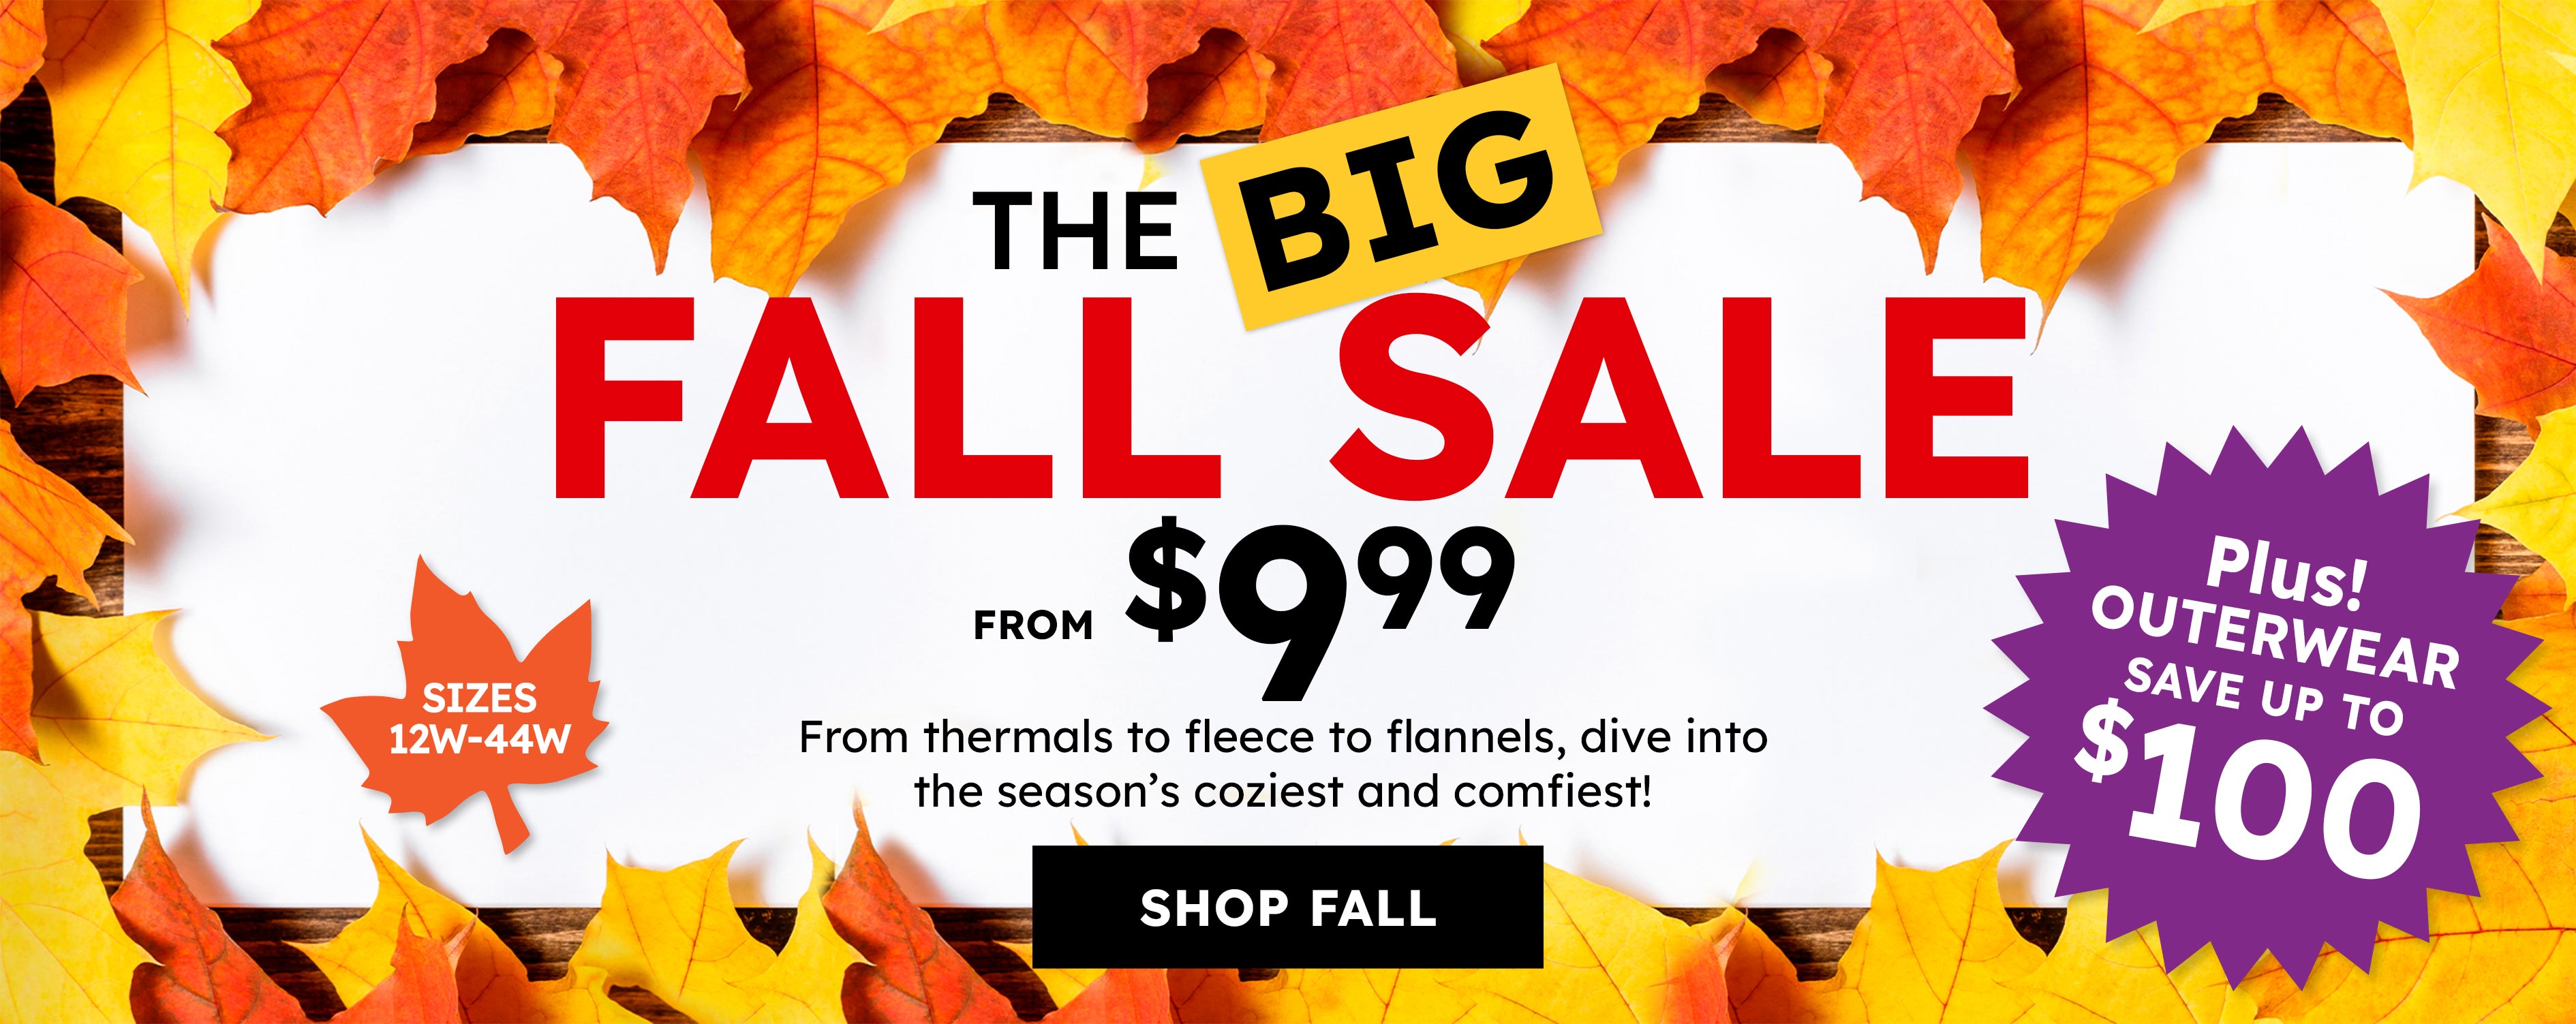 The big fall sale from 9.99